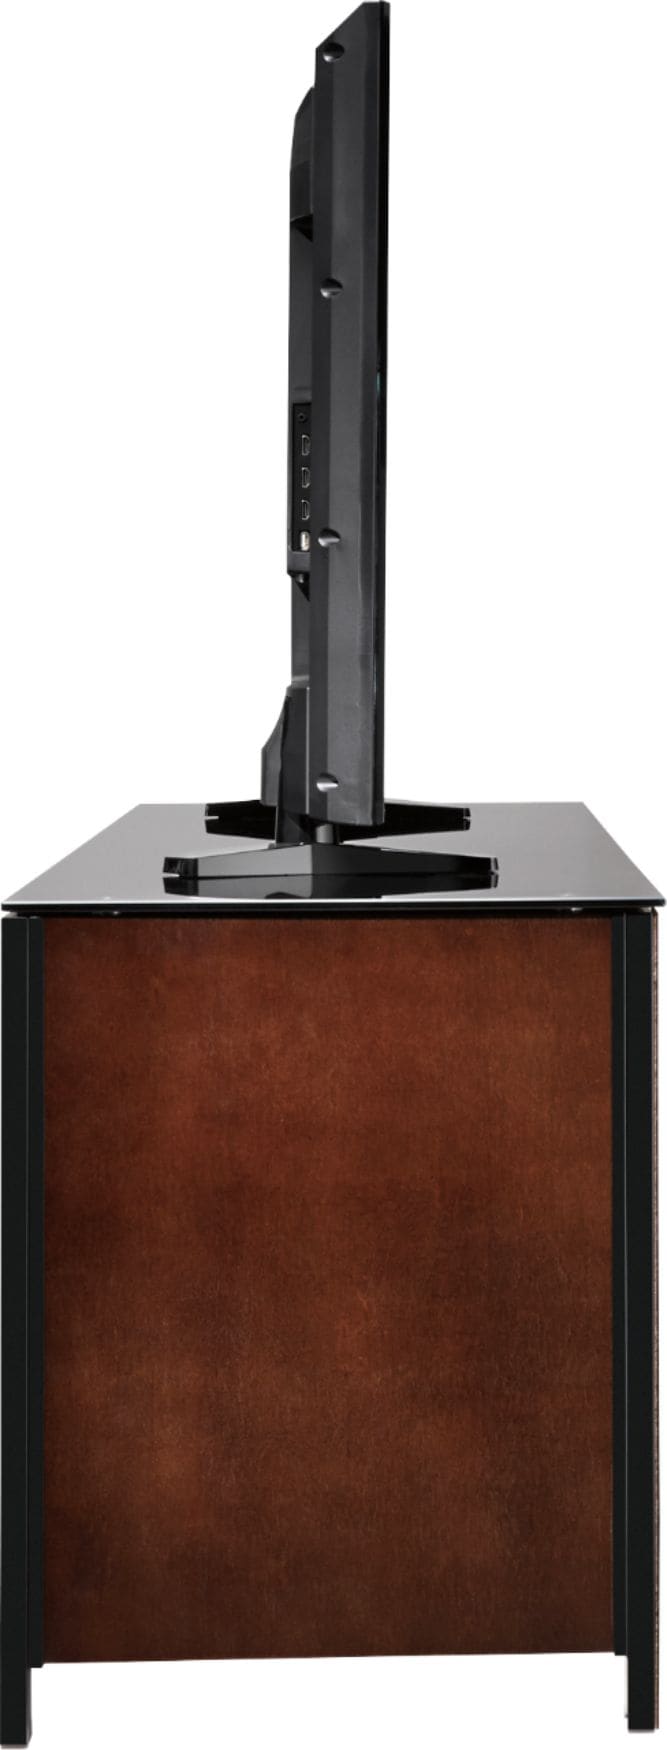 Insignia™ - TV Stand for Most Flat-Panel TVs Up to 70" - Black/Brown_4